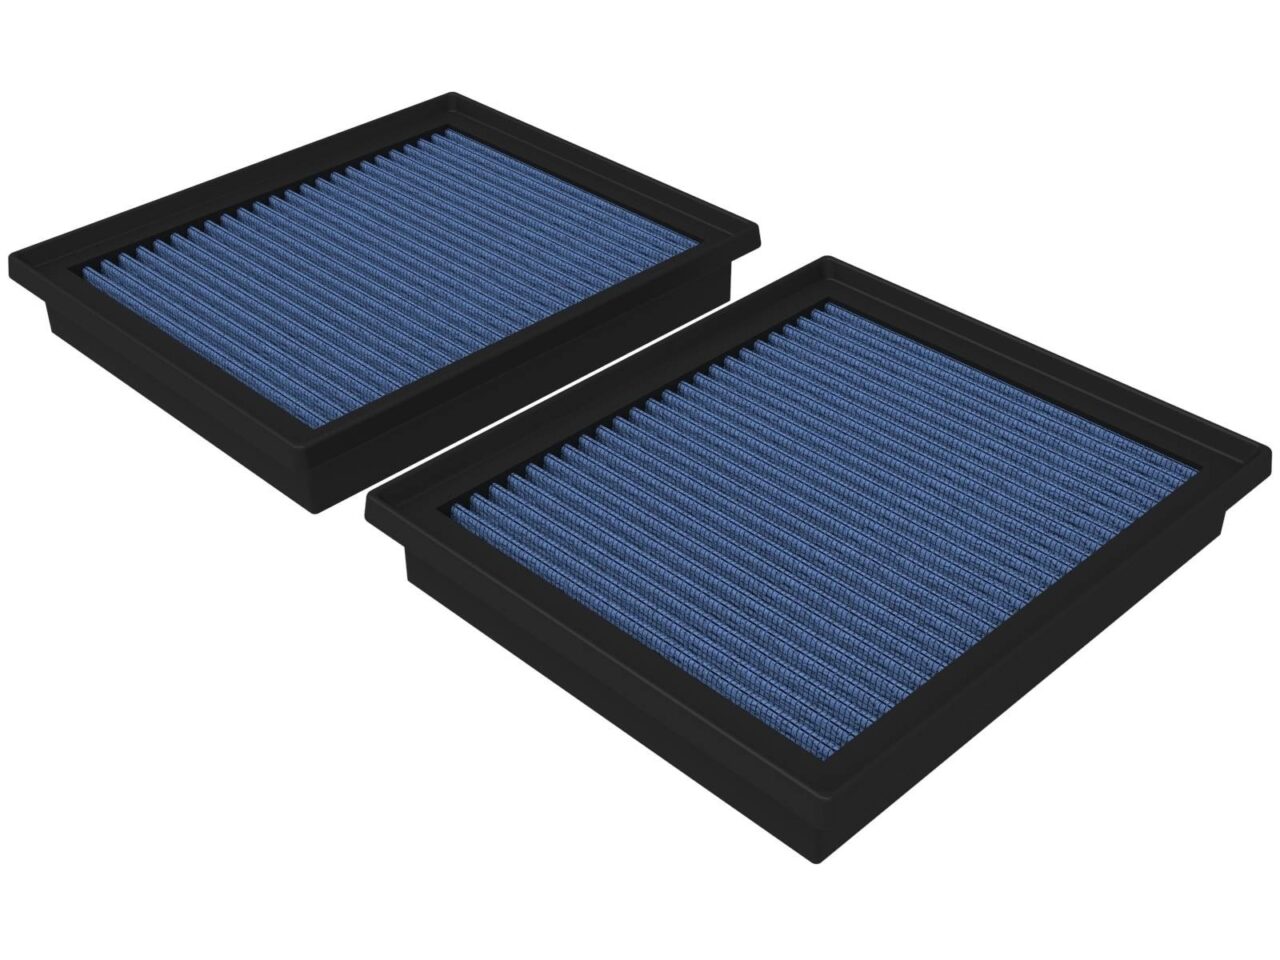 Dual blue oiled aftermarket flat panel replacement filters for Toyota Tundra on white background